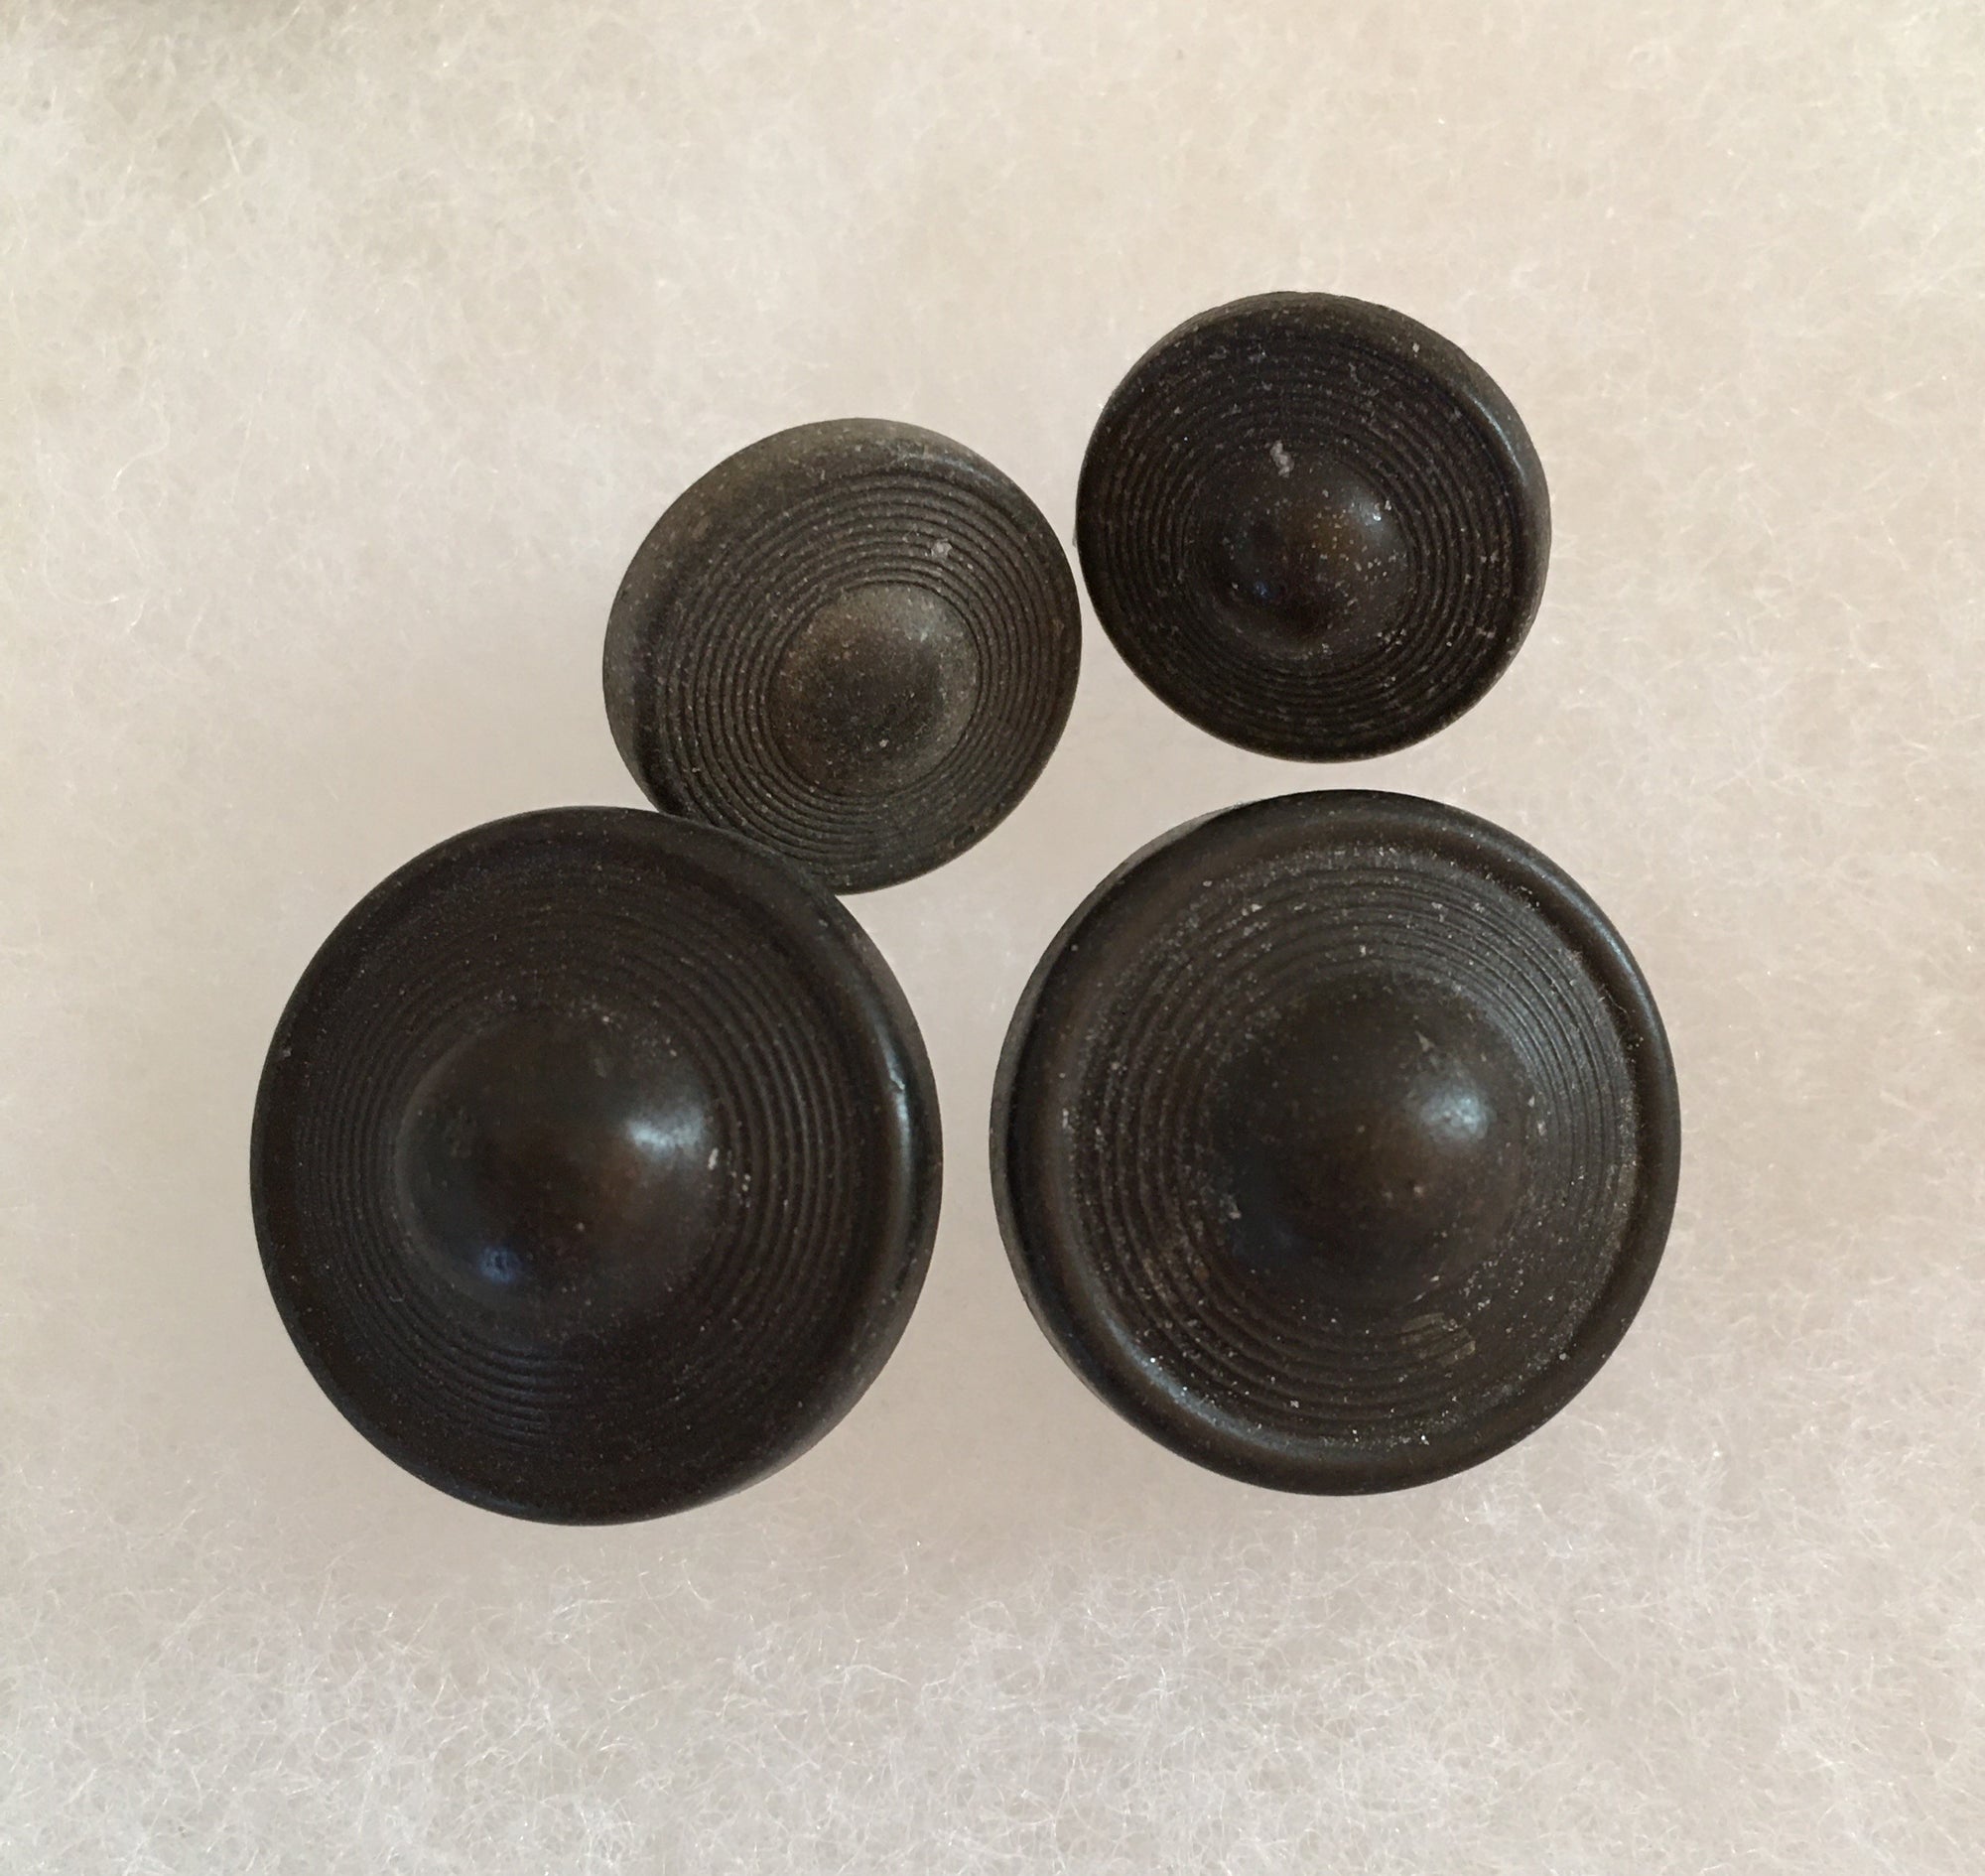 Collection of 33 Antique Rubber Buttons, Goodyear N.R. Co. Some Marked 1851